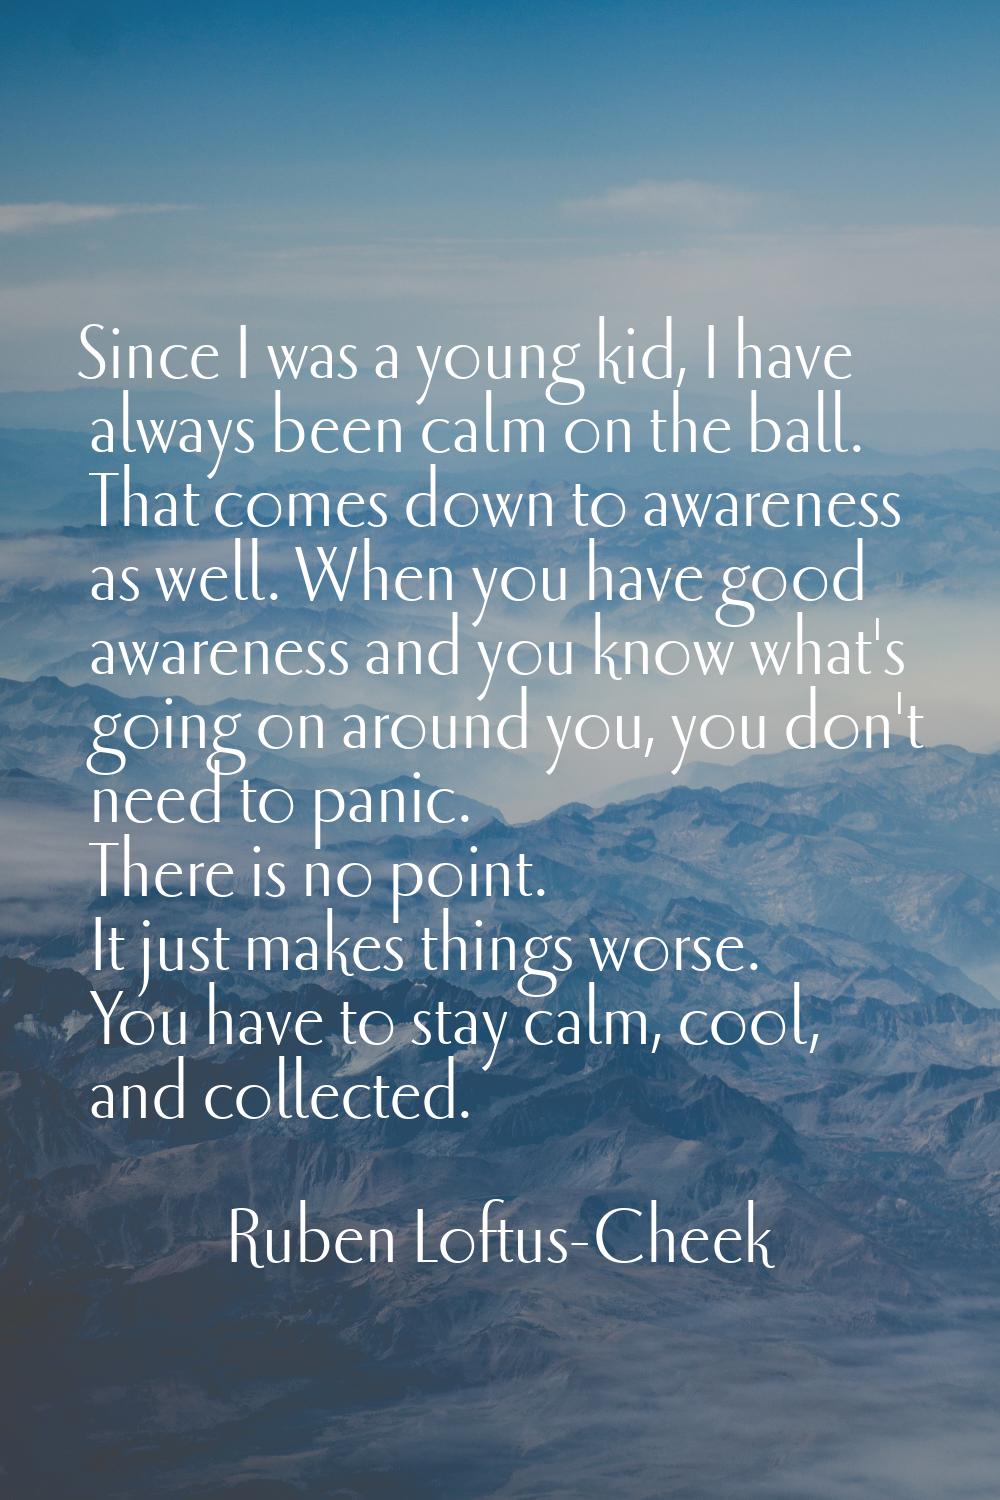 Since I was a young kid, I have always been calm on the ball. That comes down to awareness as well.